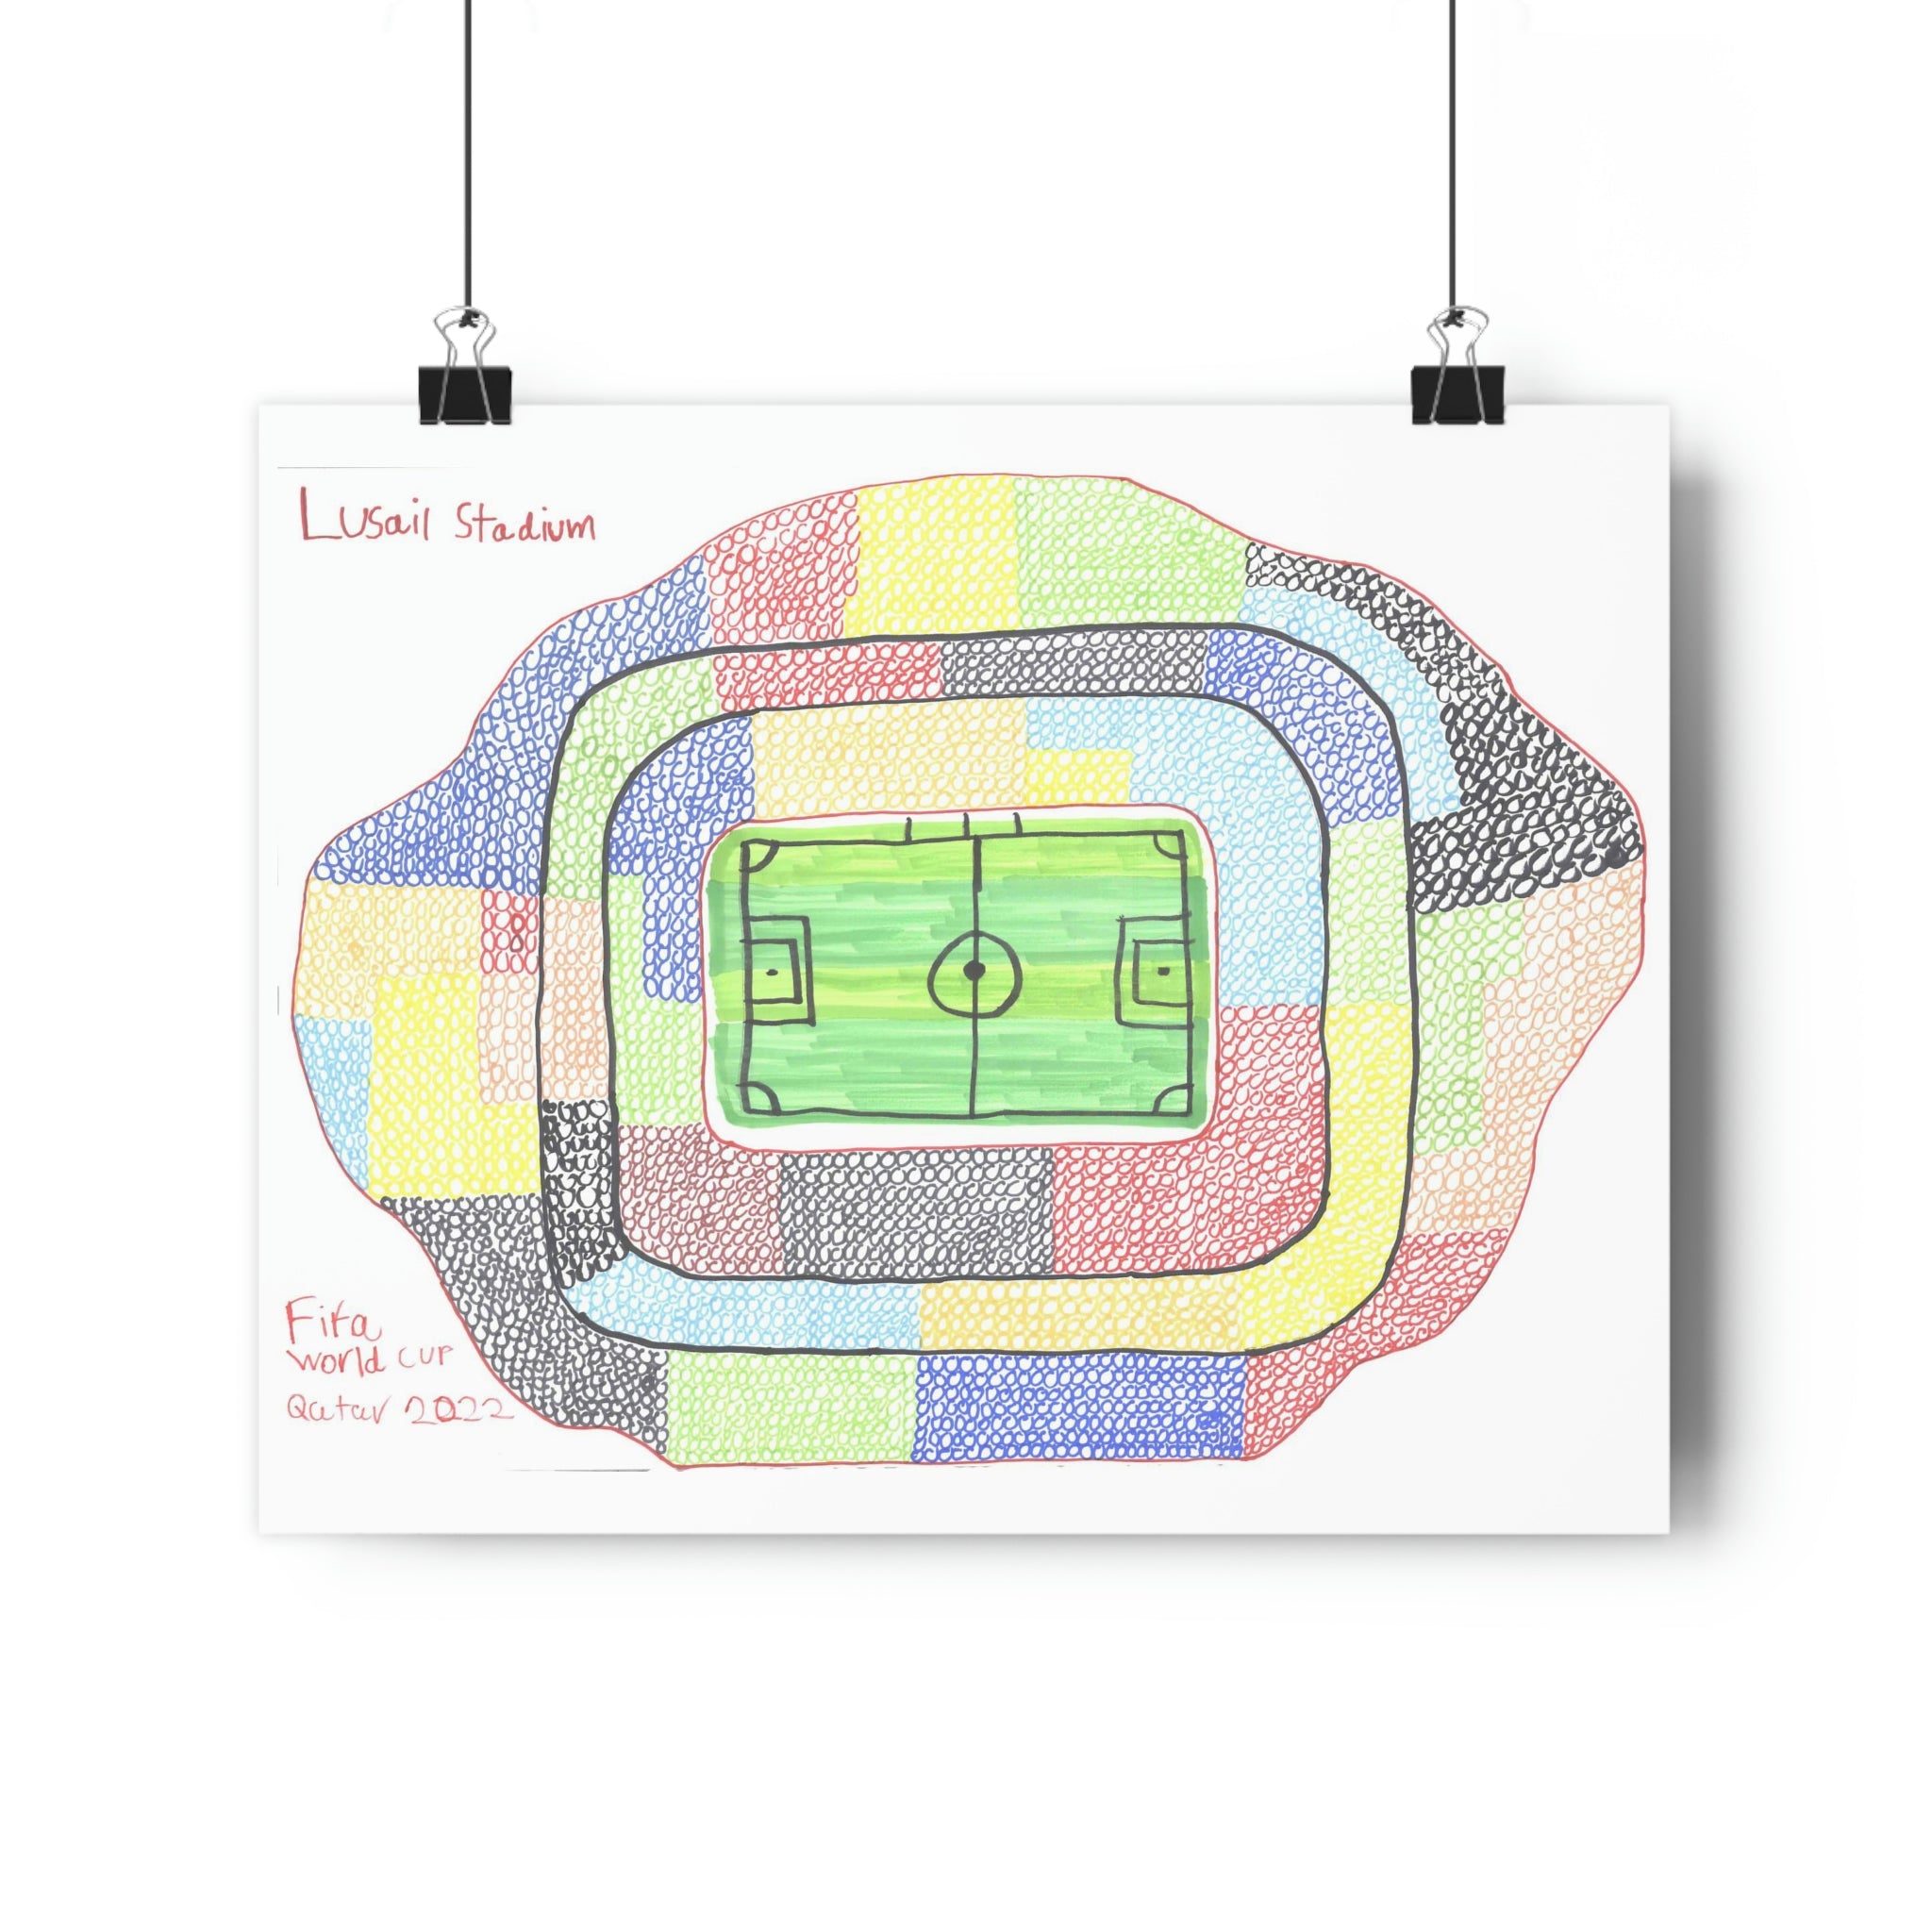 Lusail Stadium - 2022 World Cup Special - Print